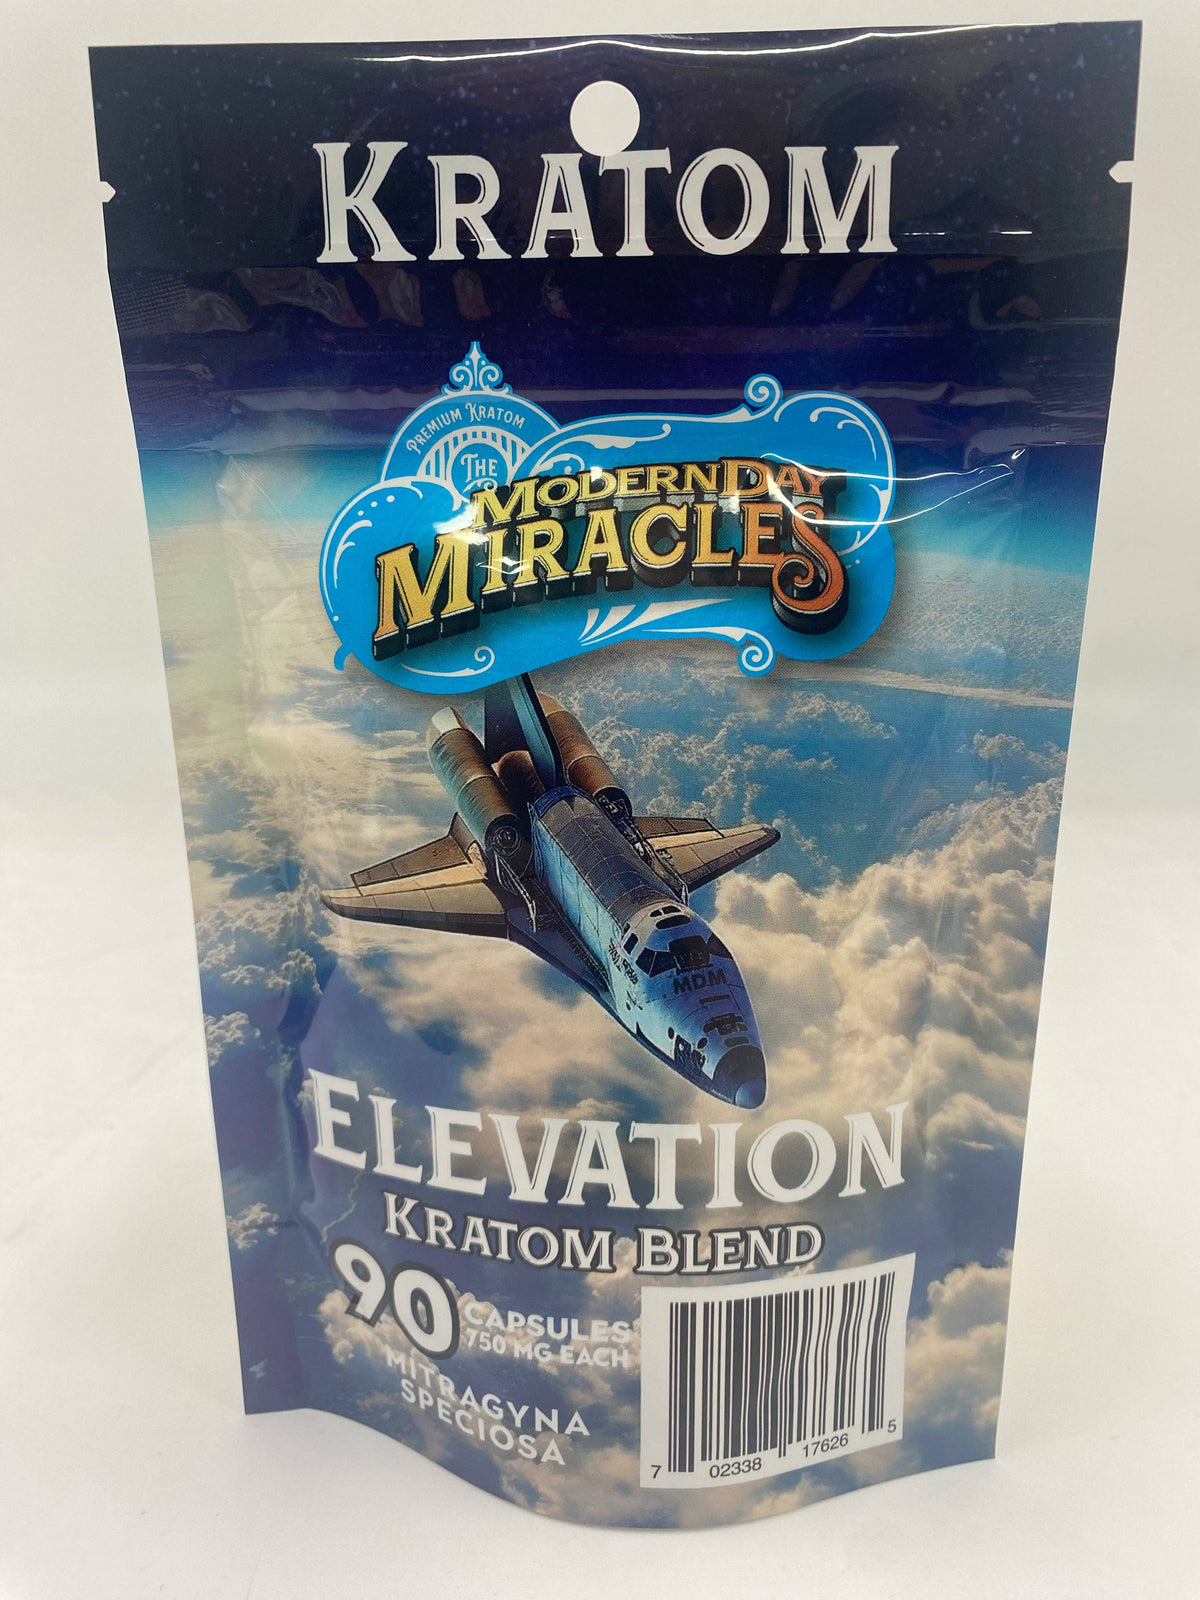 Modern Day Miracles Space Blends- Elevation White Kratom Cambodia Blend 90ct Capsules